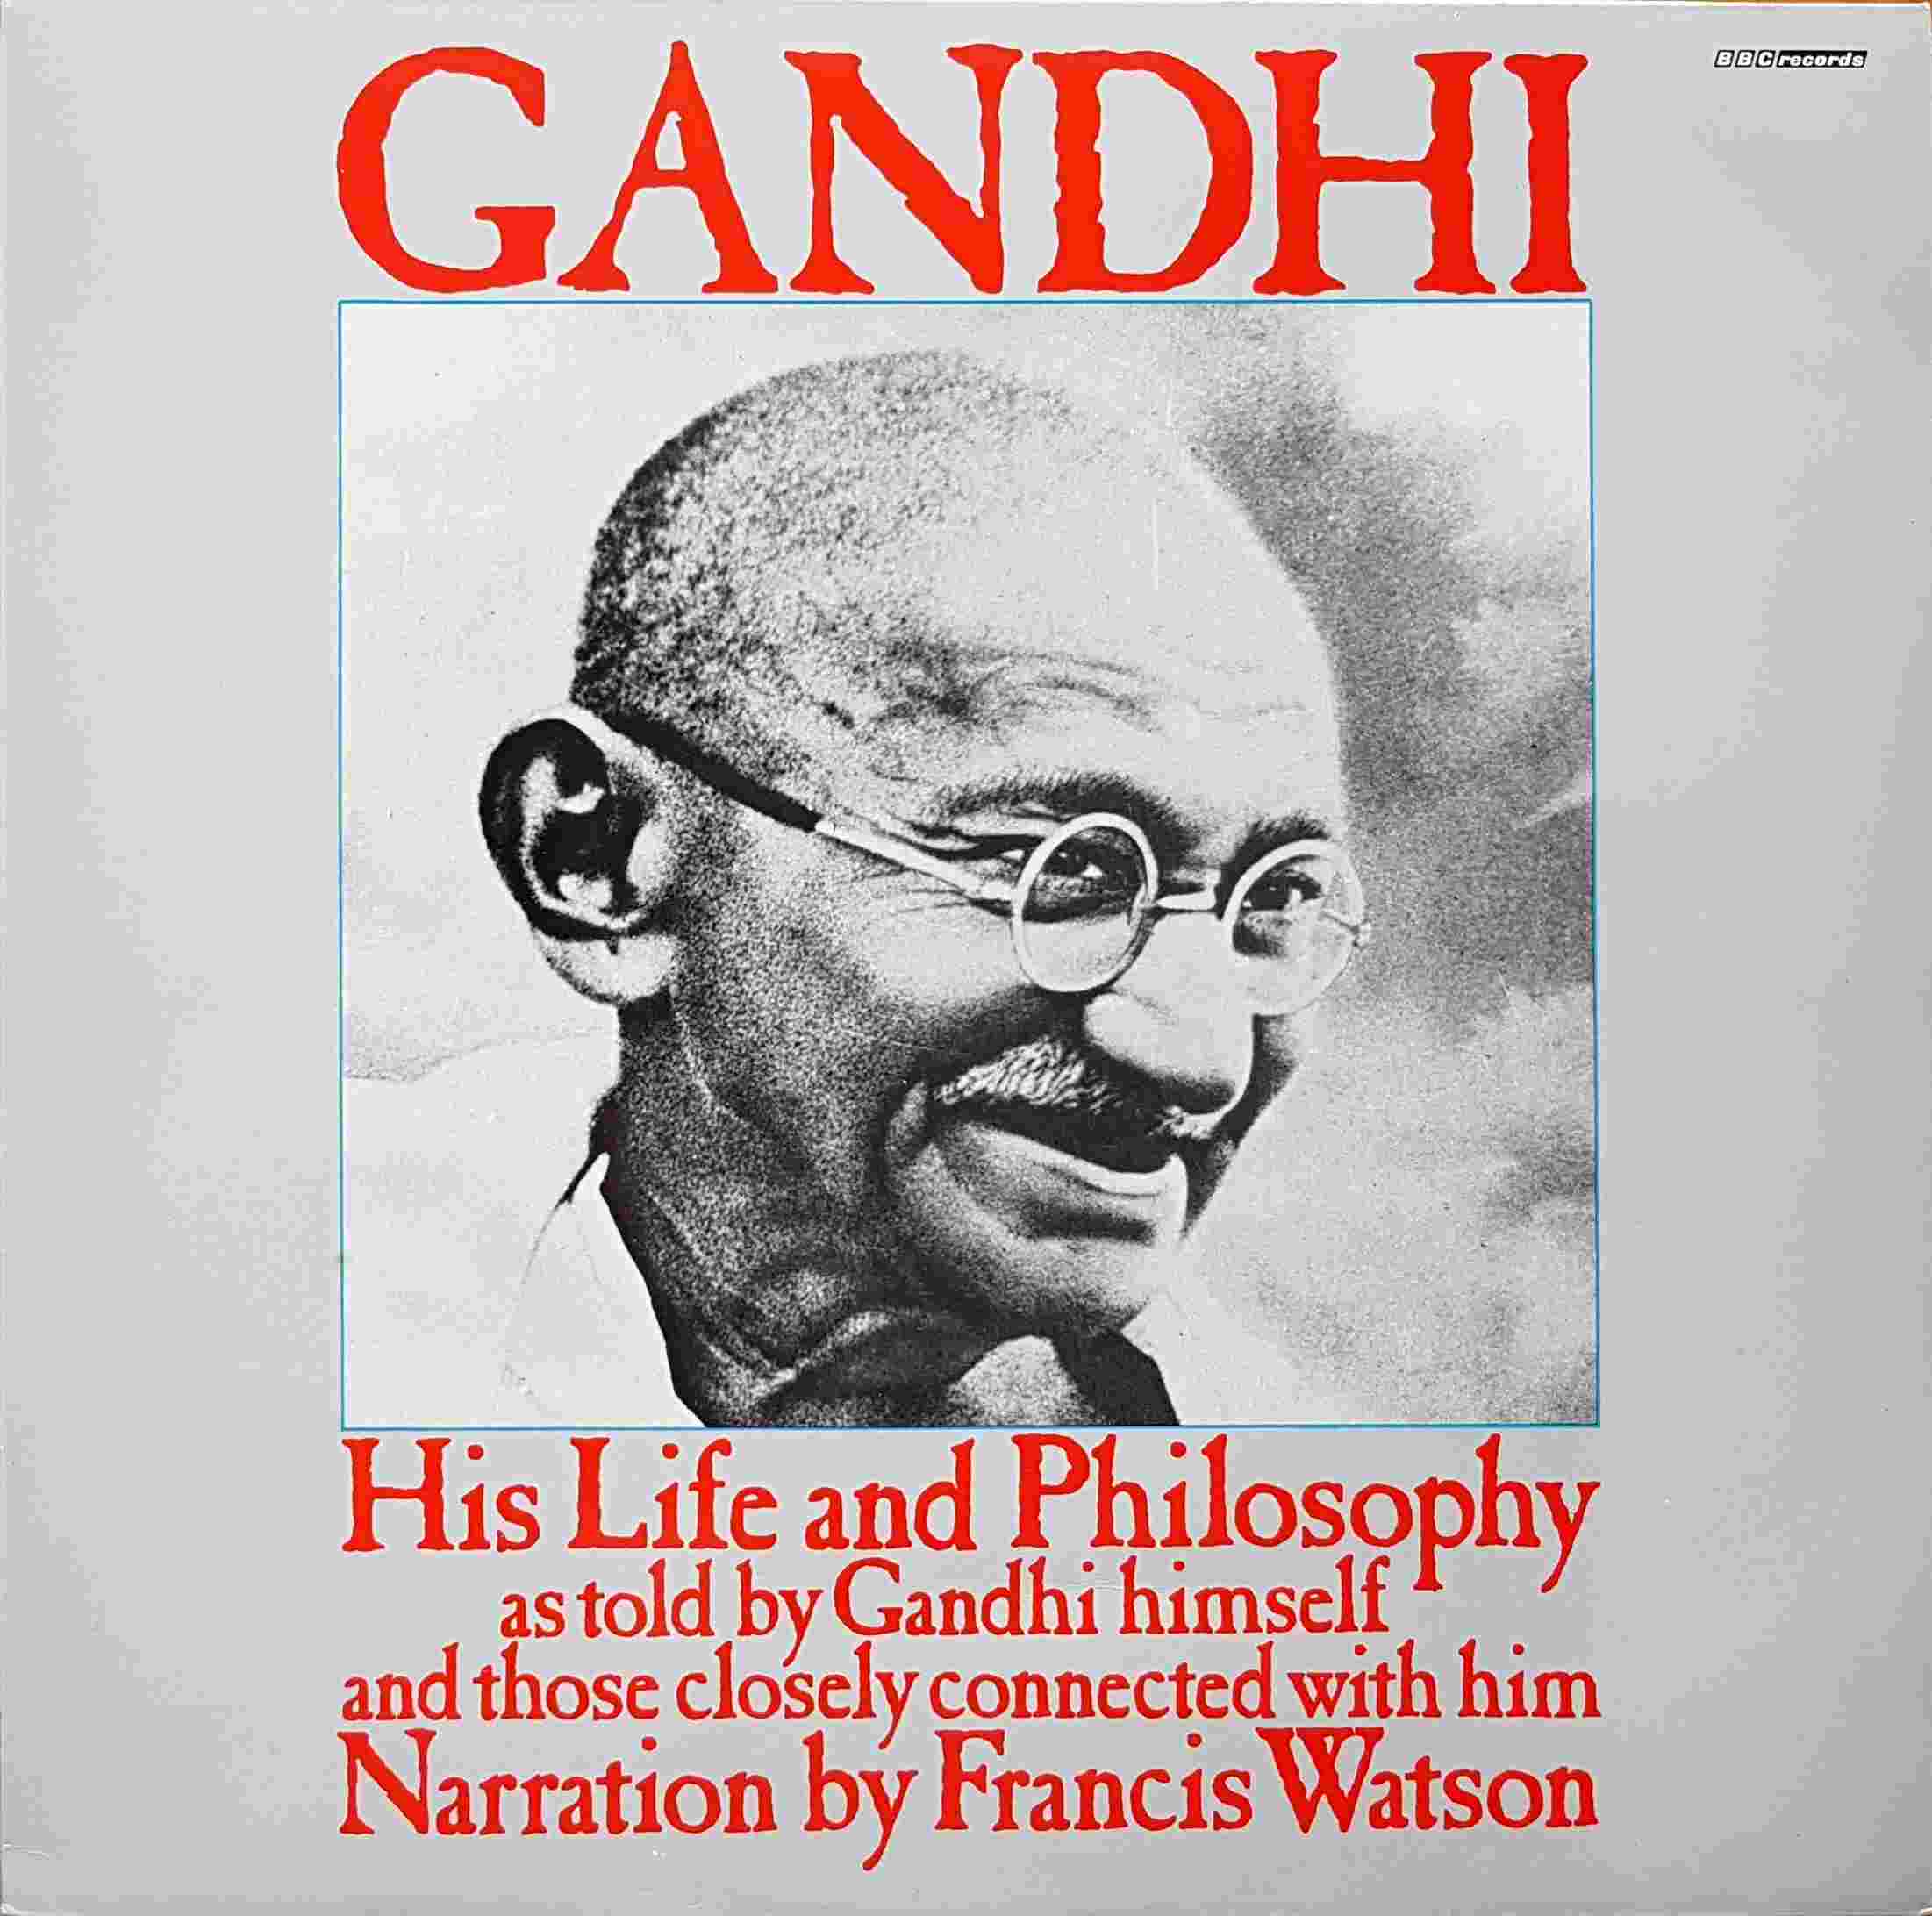 Picture of REH 466 Gandhi by artist Various from the BBC albums - Records and Tapes library